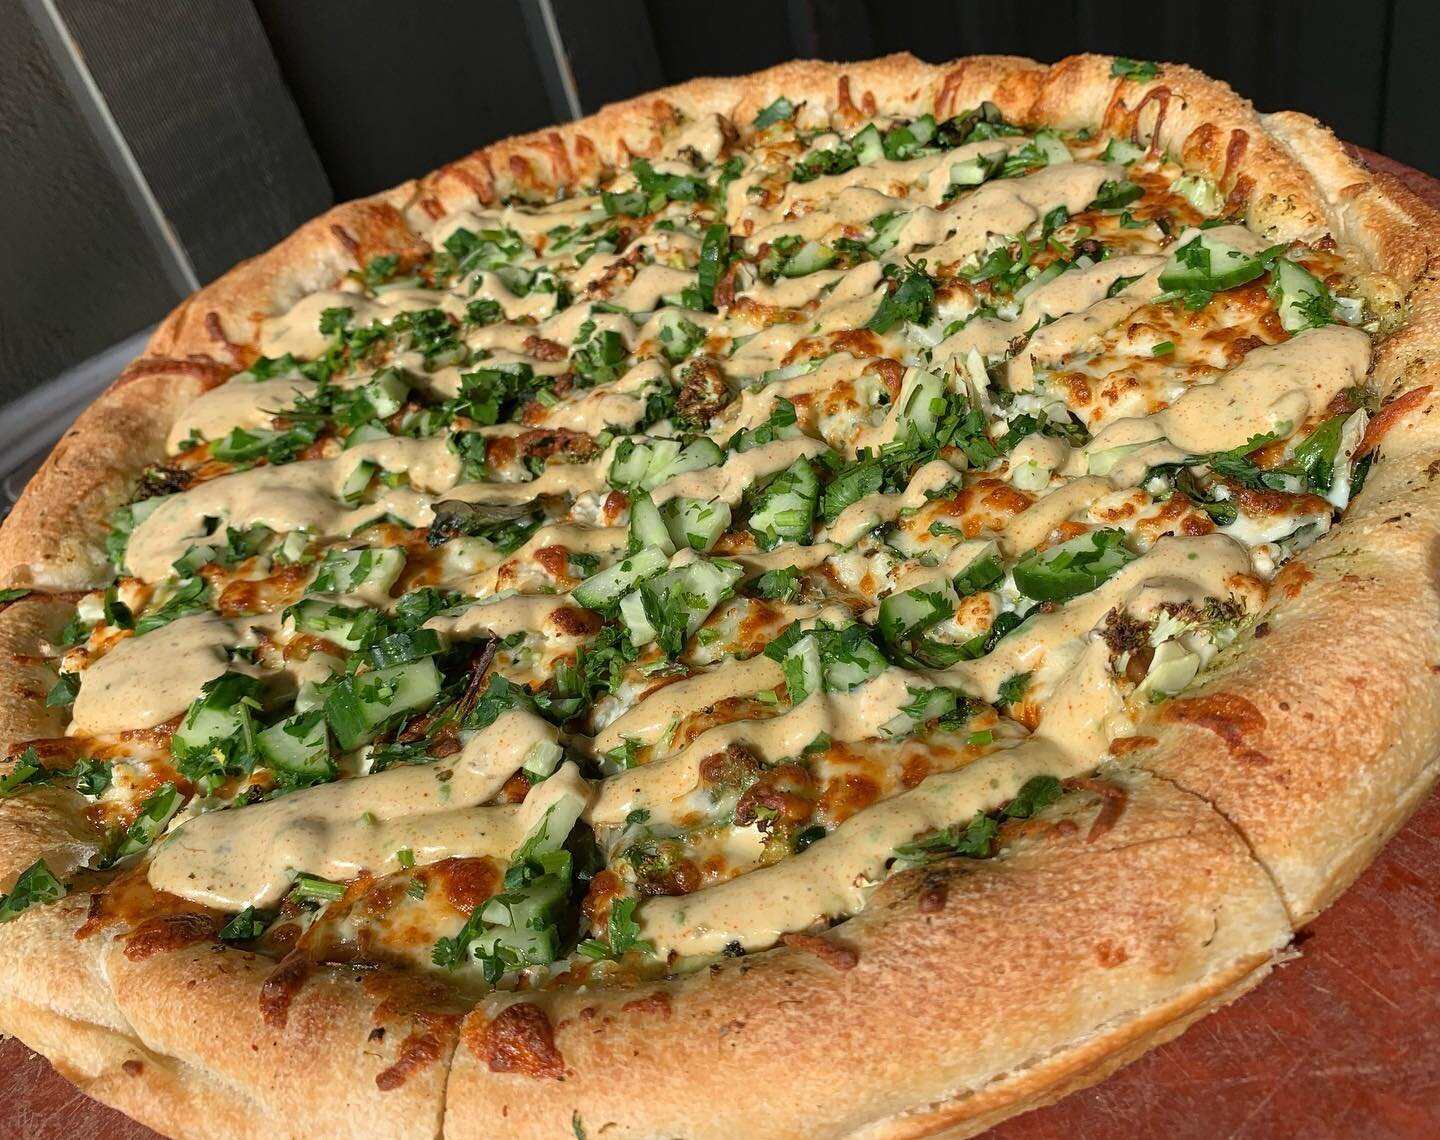 April Feature: The Green Goddess Pizza 🥦🥑

Our artisan dough topped with garlic butter, pesto, spinach, green cabbage, broccoli, leeks, goat cheese, roasted garlic and Edam &amp; mozzarella blend. Finished with a fresh cilantro cucumber lime topper